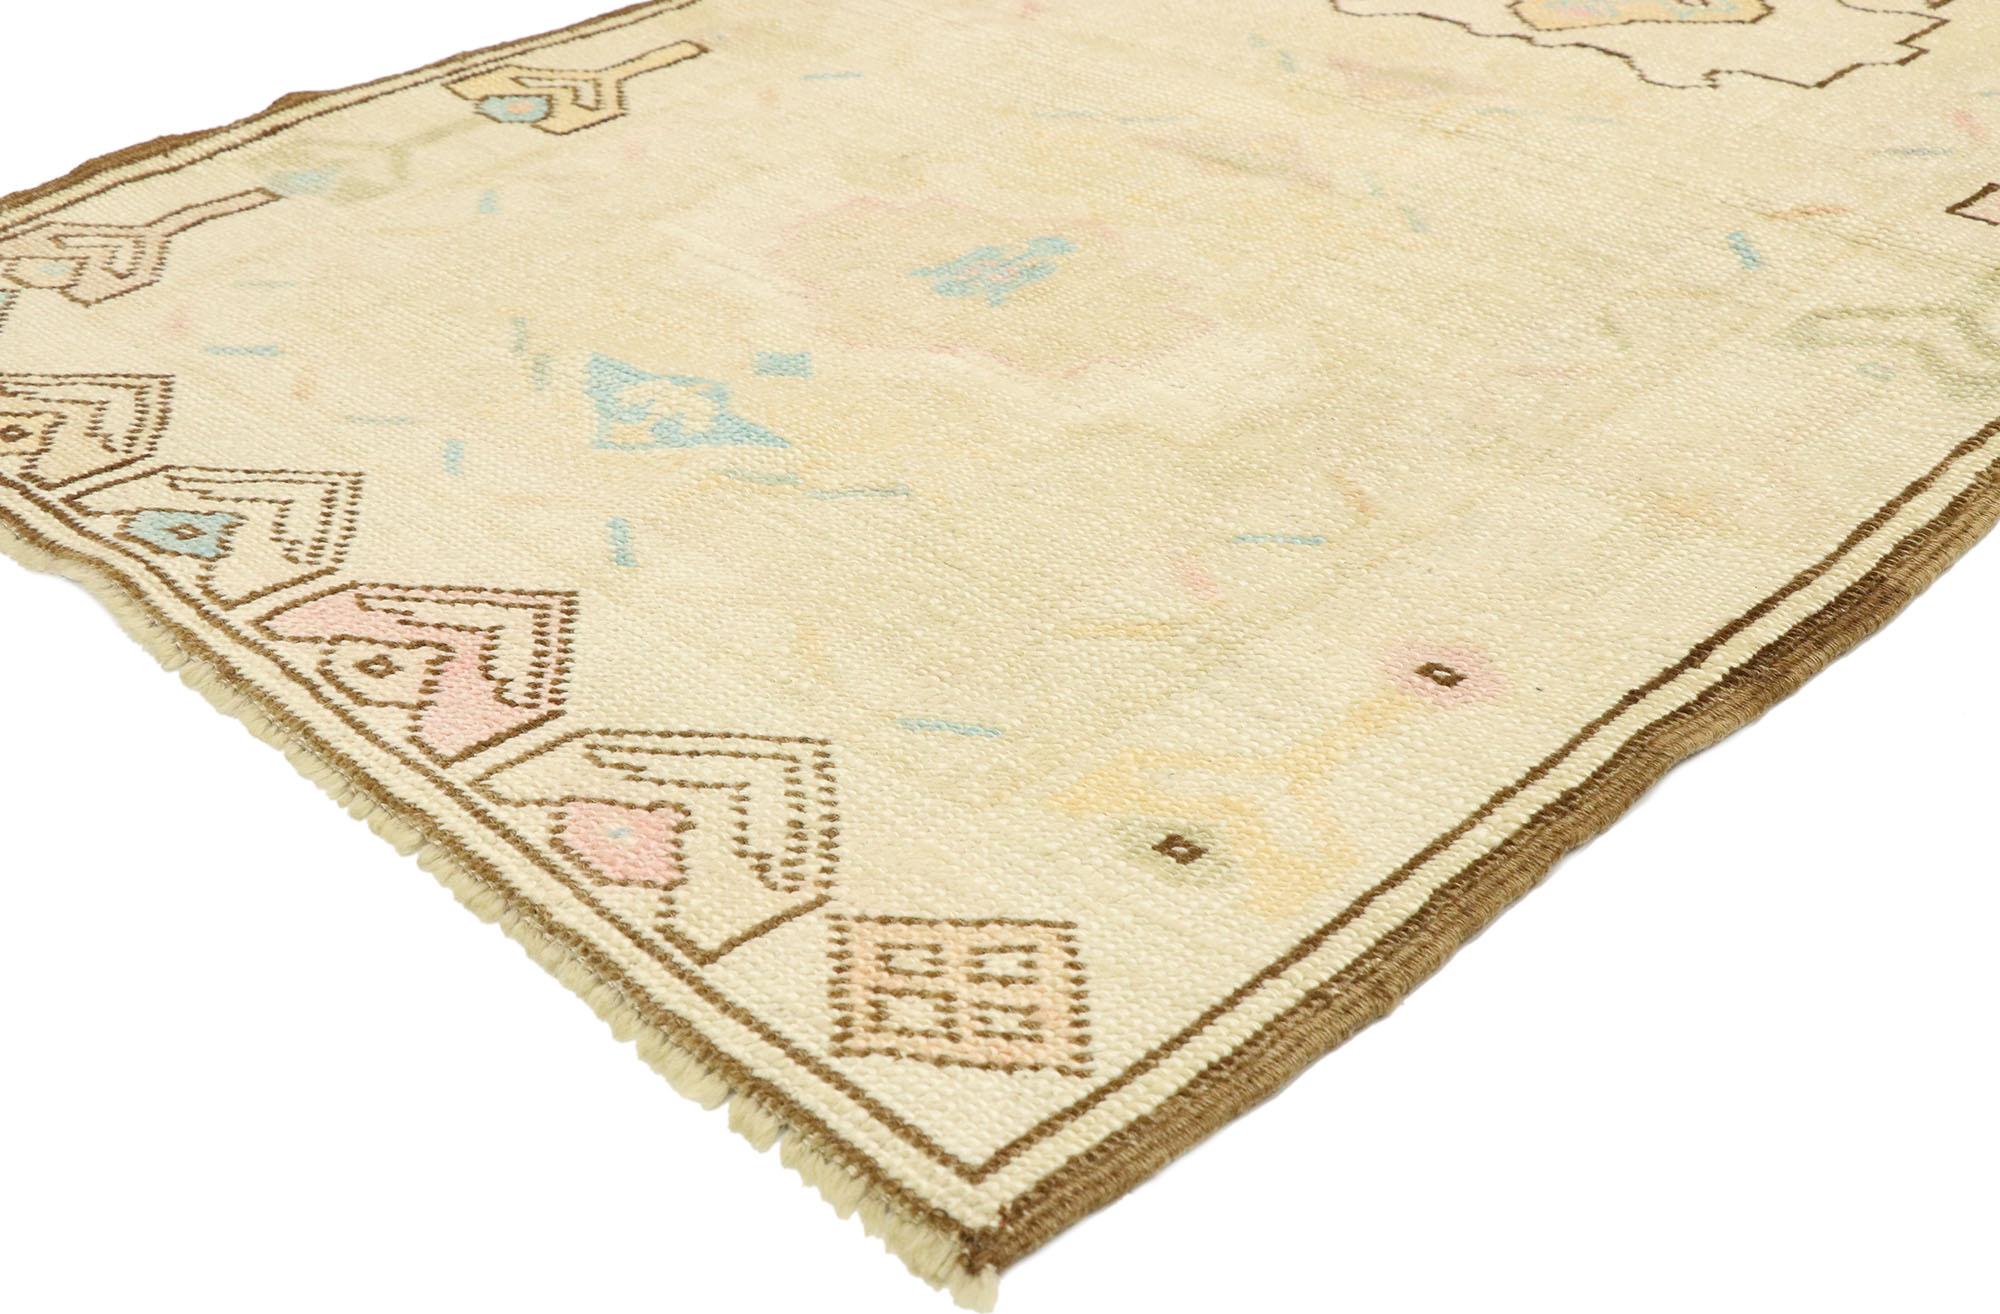 52938 vintage Turkish Oushak rug with Romantic Georgian Cottage French style. Soft, bespoke vibes meet English Country Cottage style in this hand knotted wool vintage Turkish Oushak rug. The champagne-beige antique washed field beautifully displays